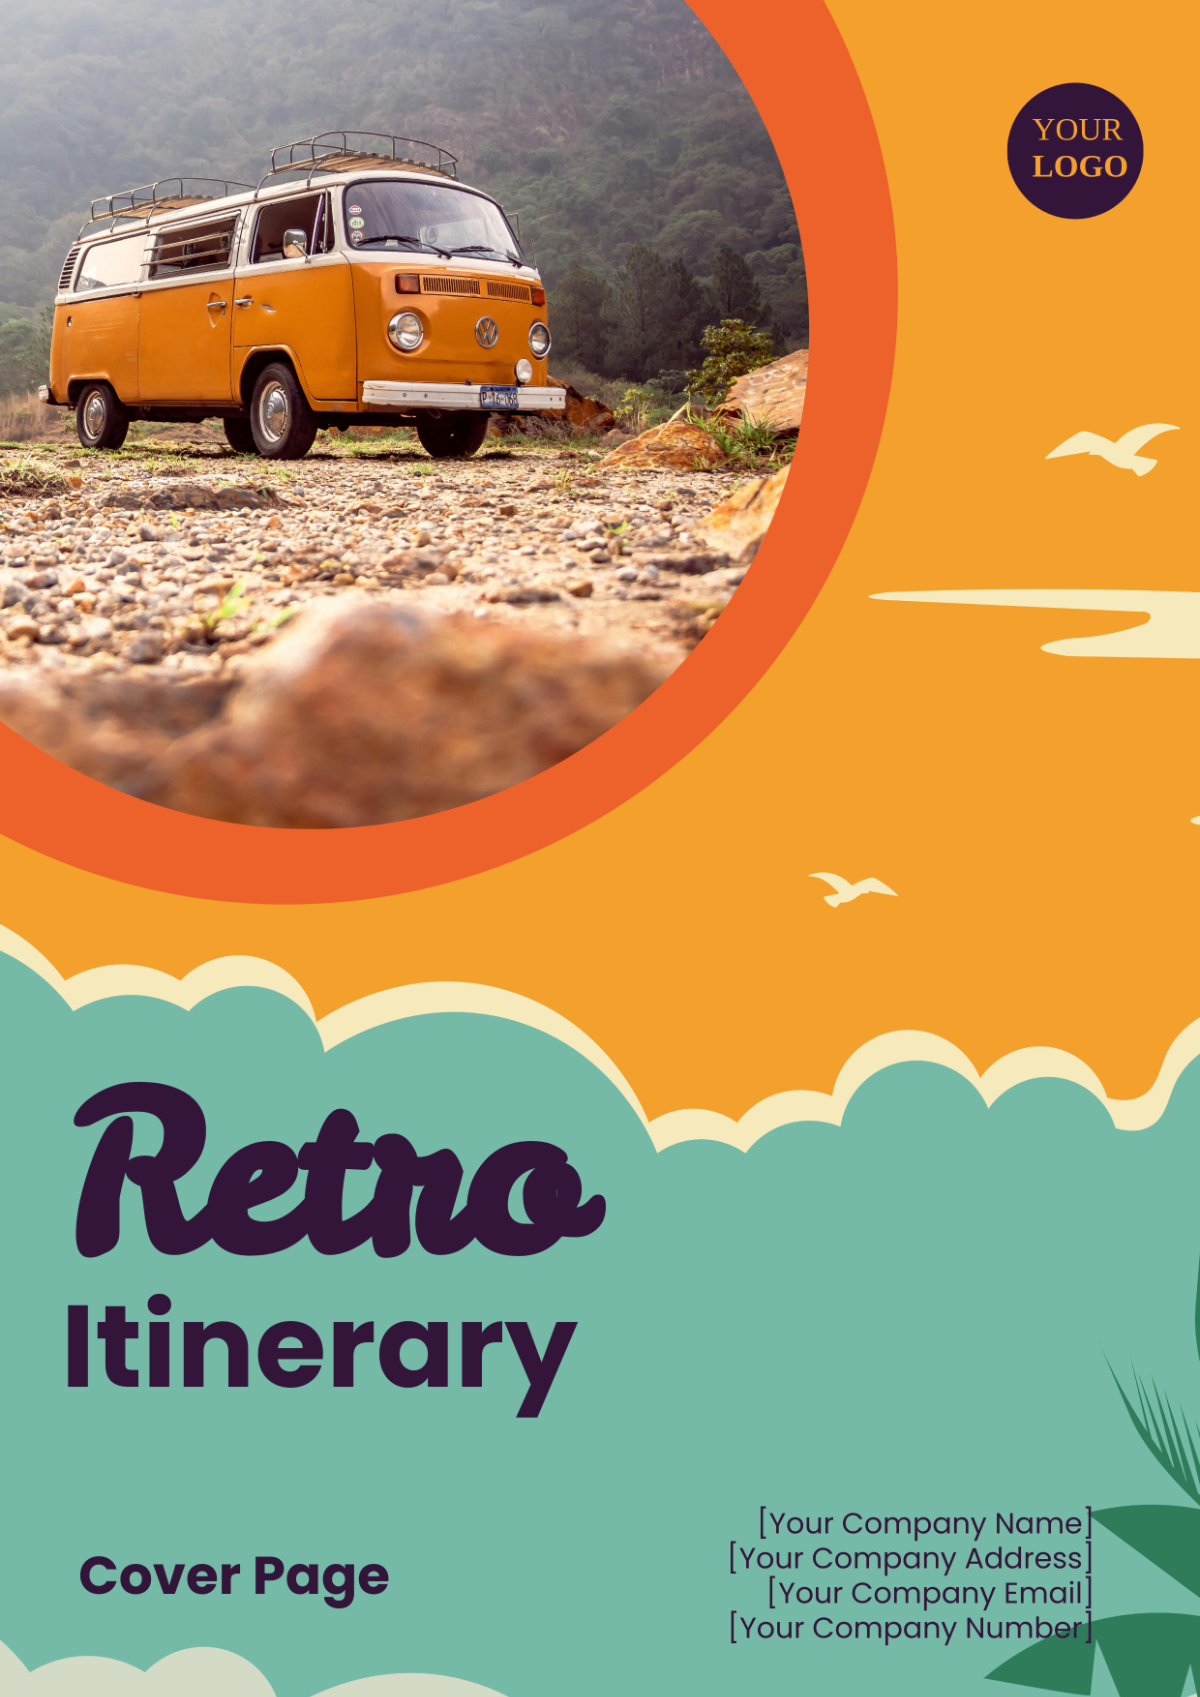 Retro Itinerary Cover Page